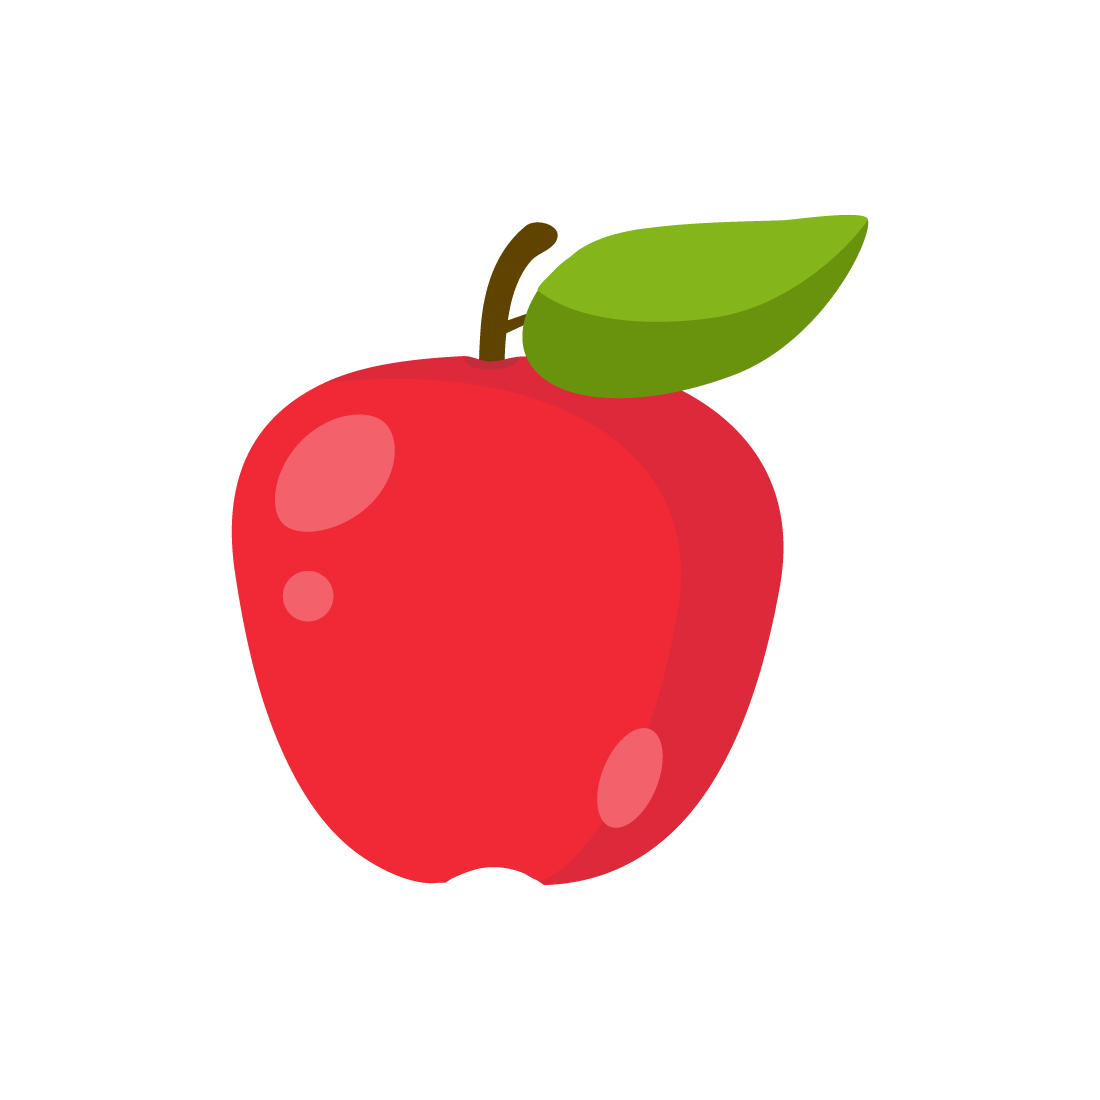 Red Apple Illustration On White Background preview image.